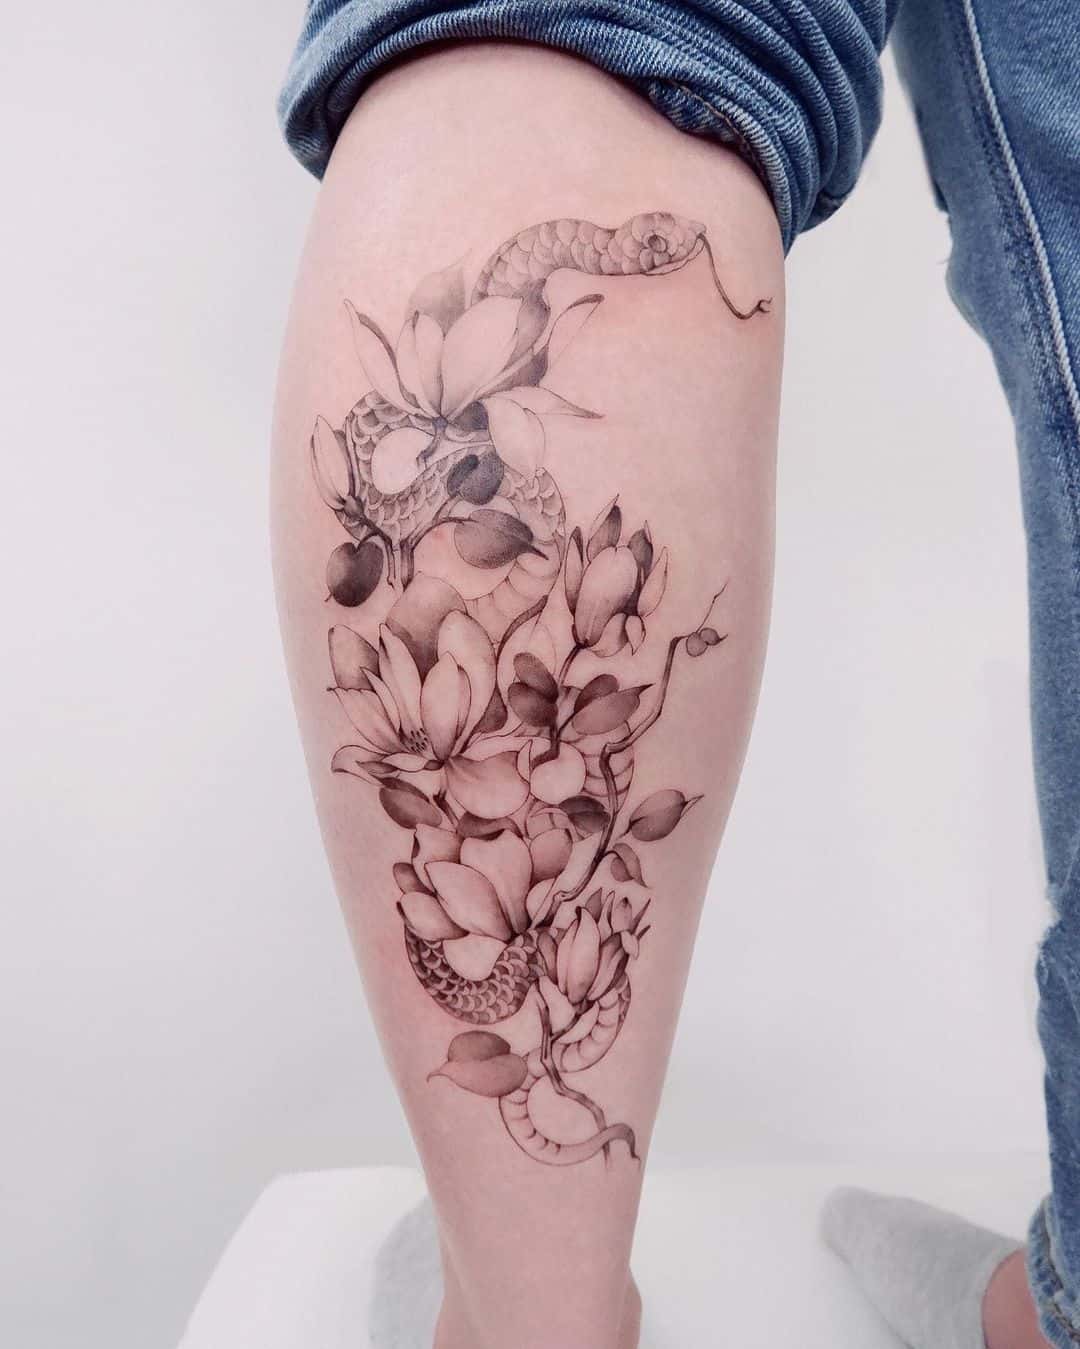 Snake and Flower tattoo